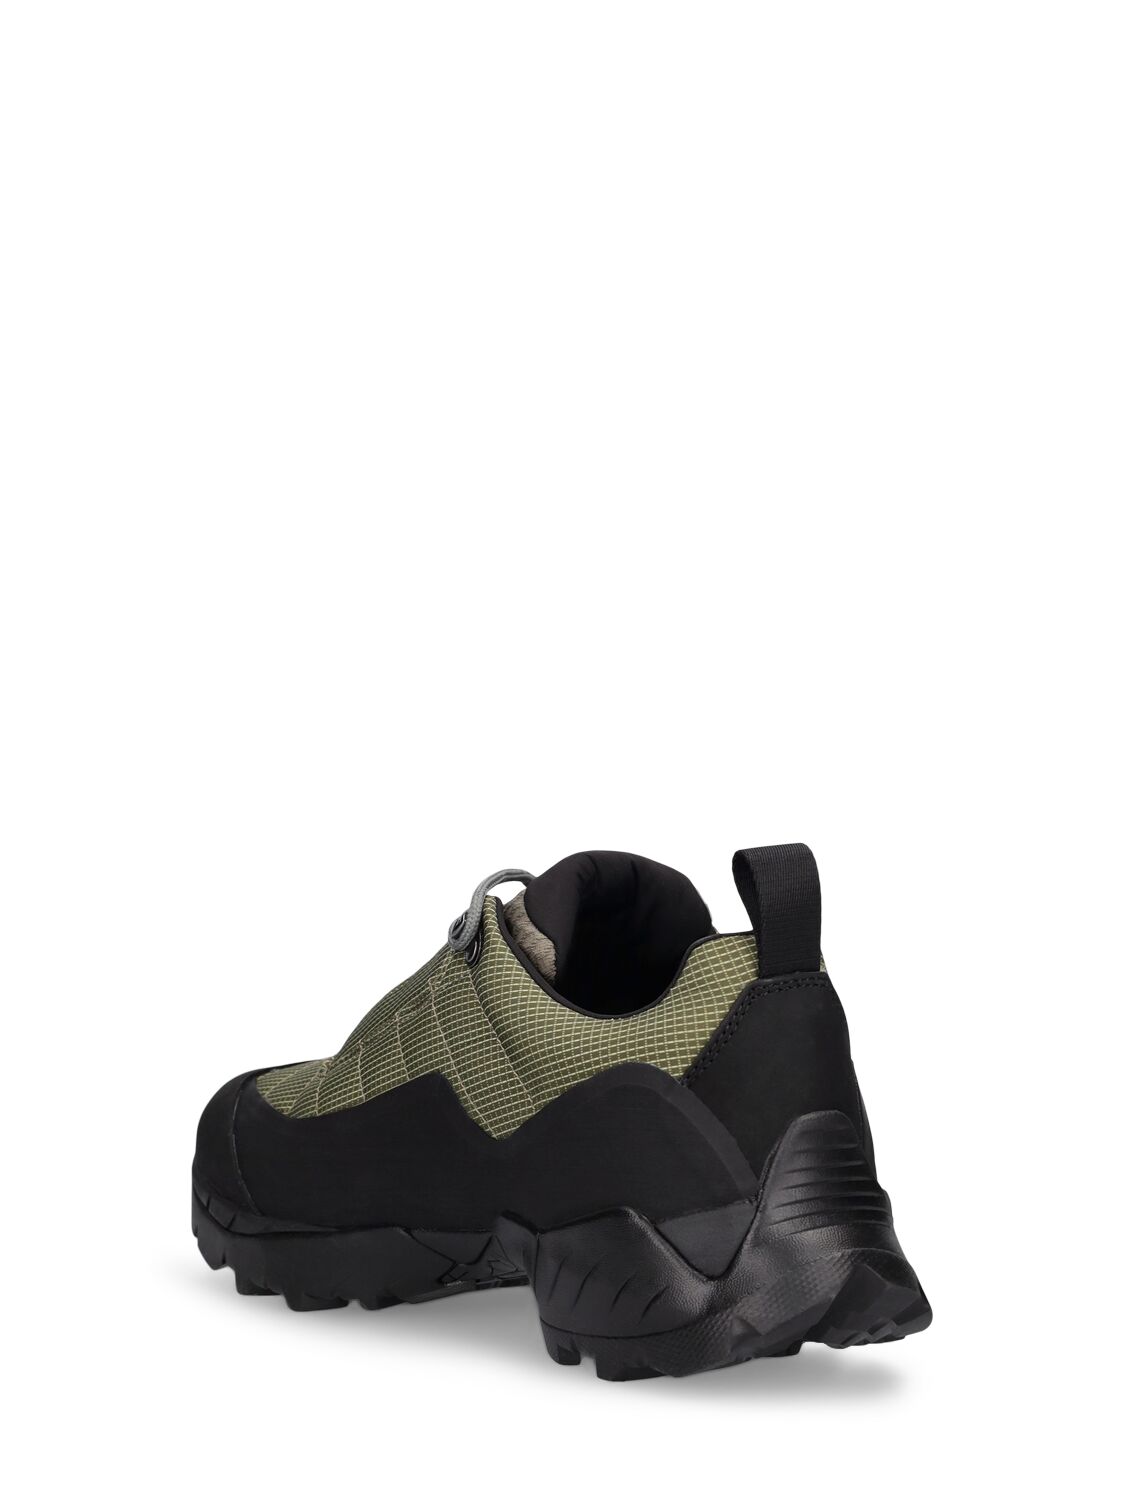 Shop Roa Katharina Tech & Leather Sneakers In Olive,black